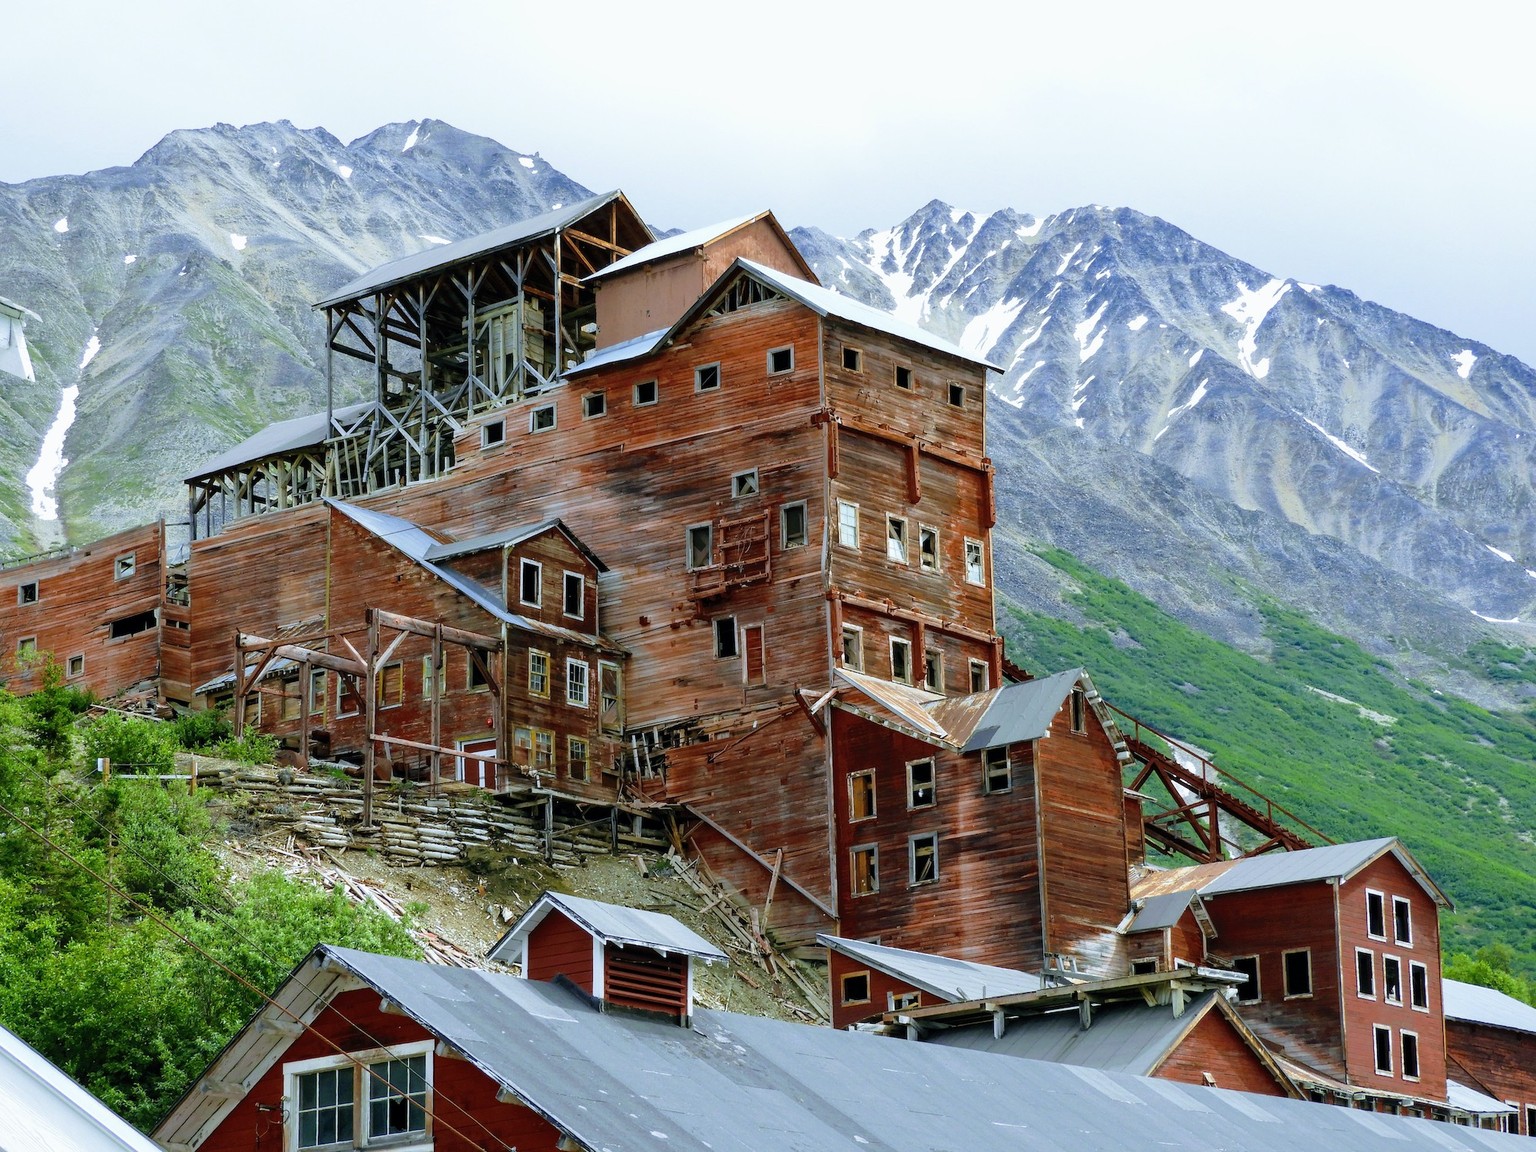 McCarthy, Alaska, July, 2019, view of abandoned Kennecott copper mine with mountains in the background.